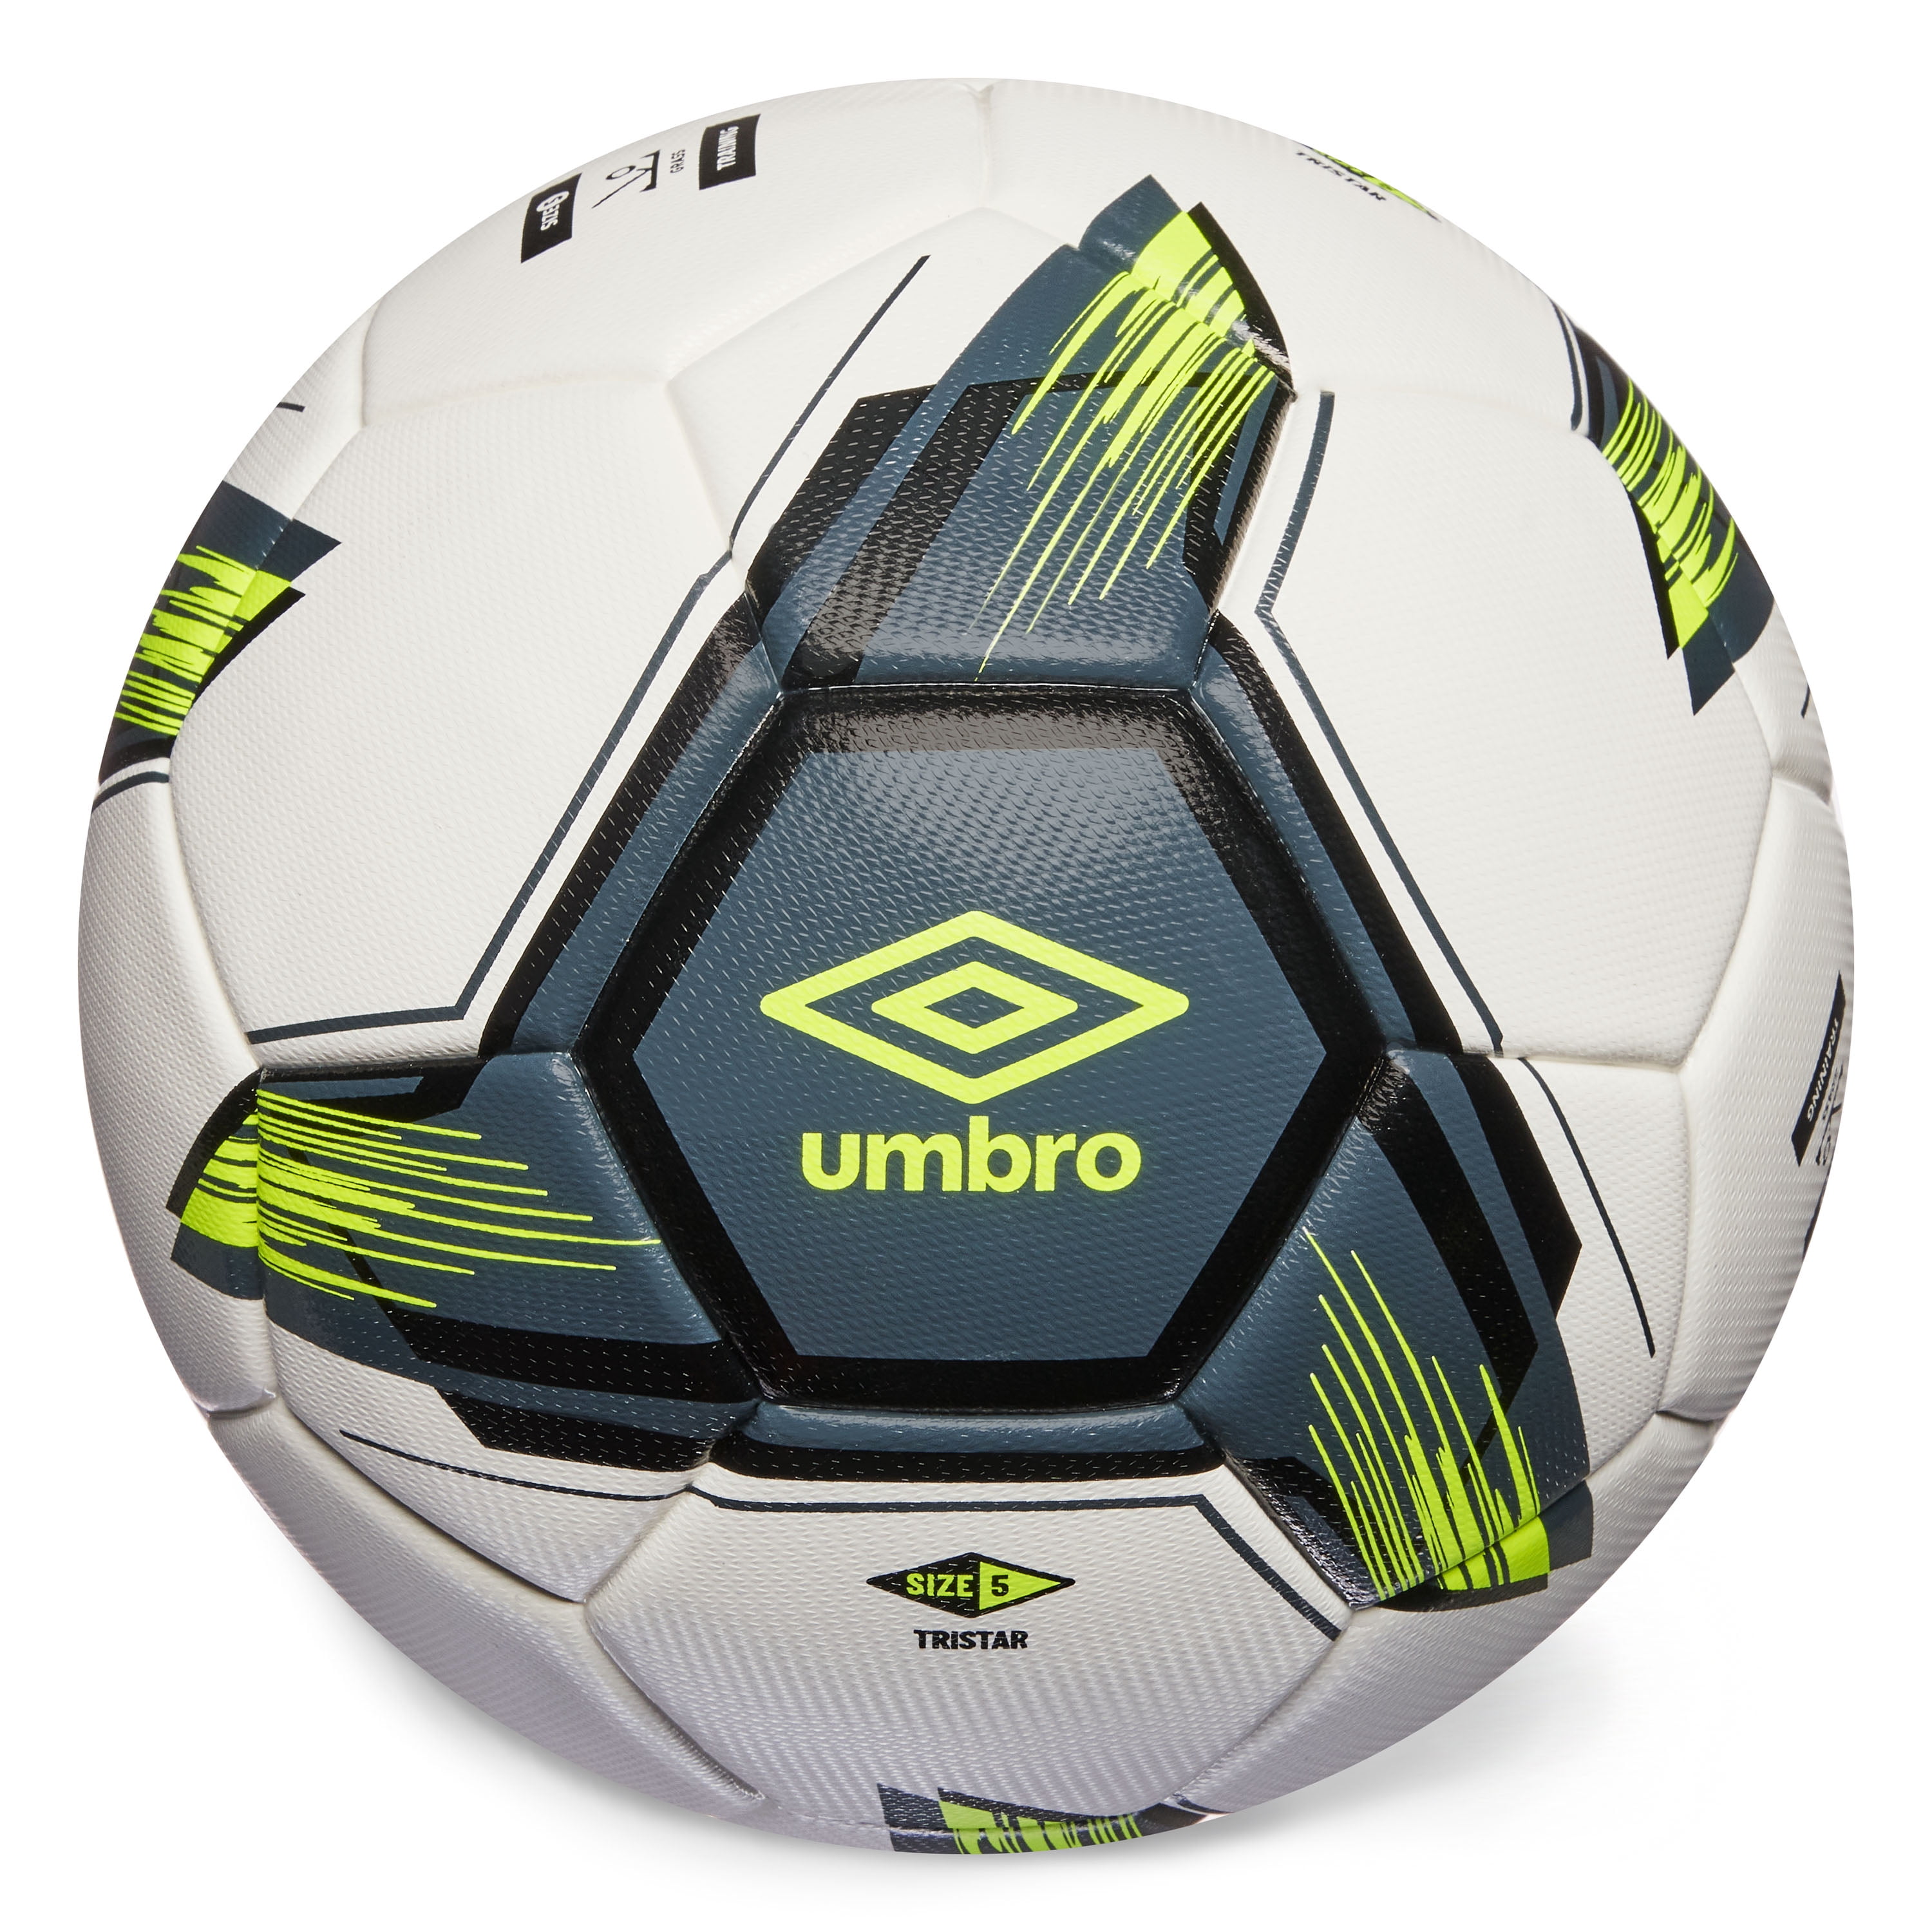 Umbro Tristar Size 5 Adult and Teen Soccer Ball, White/Gray/Yellow